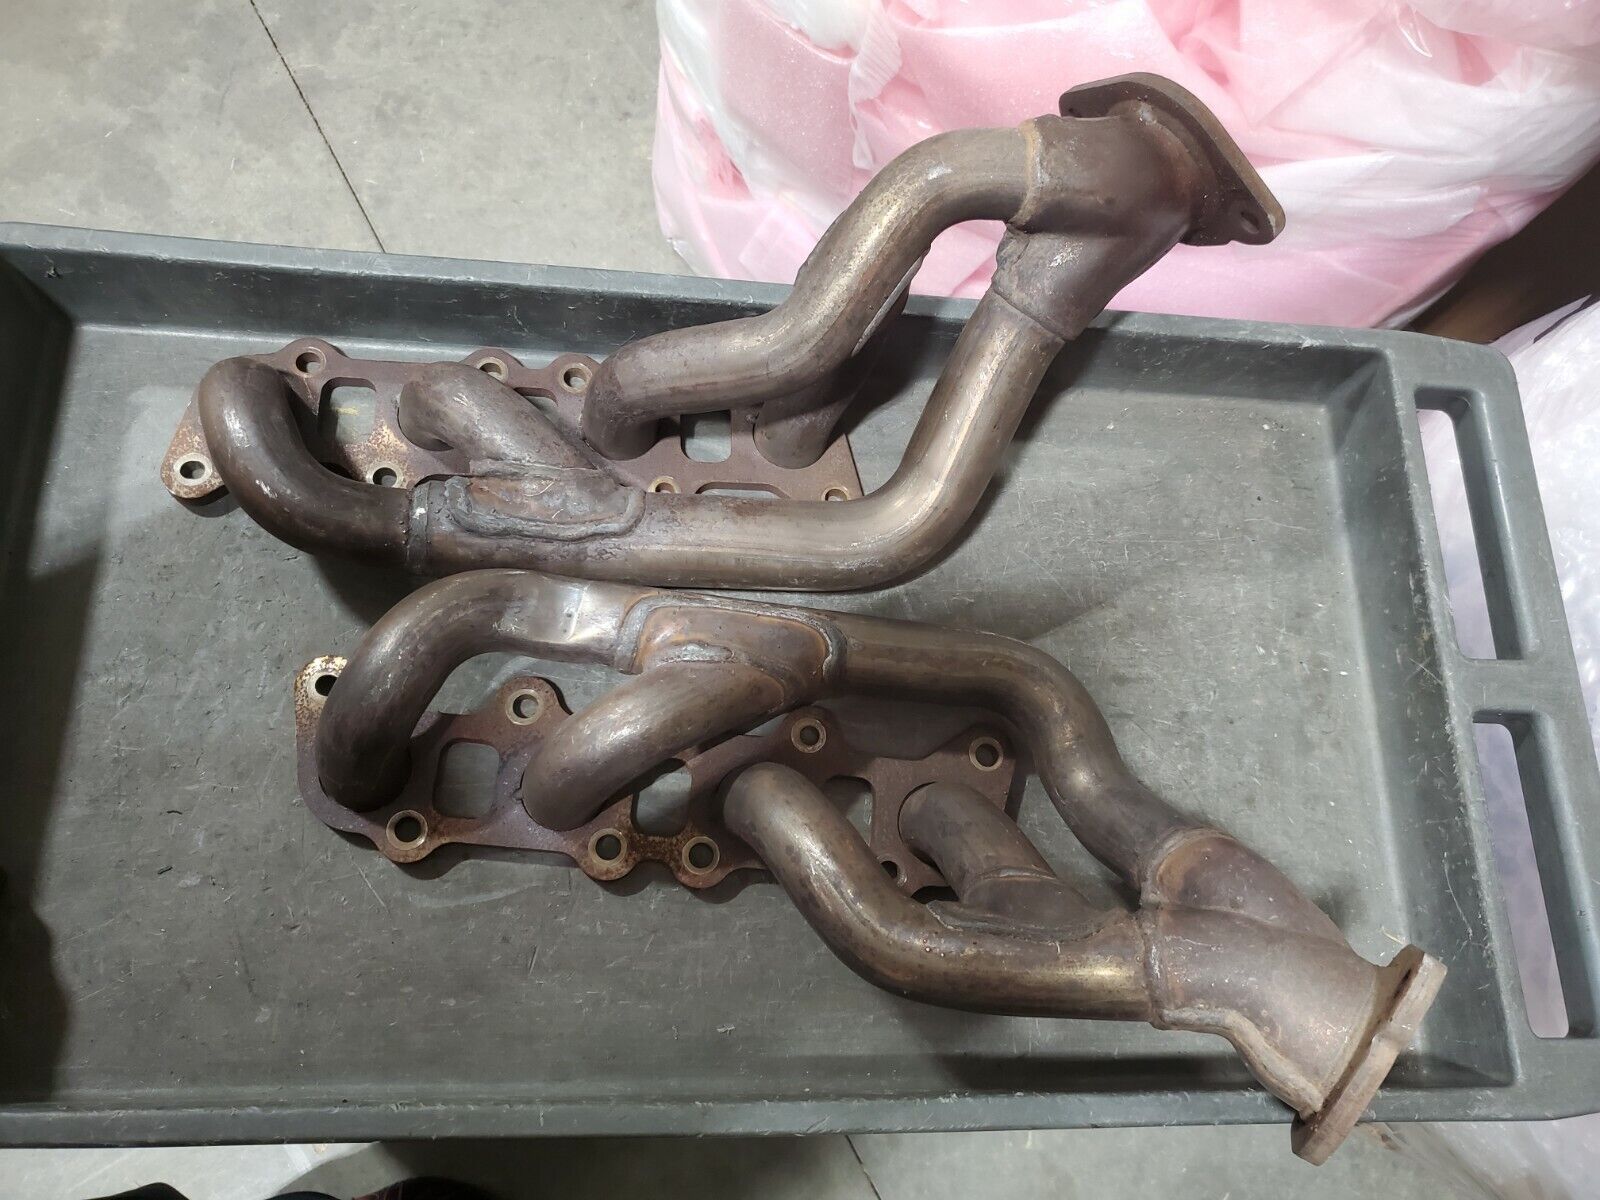 MUSTANG 5.0 GT EXHAUST MANIFOLD HEADER 2011 2012 2013 2014 11 12 13 14 coyote